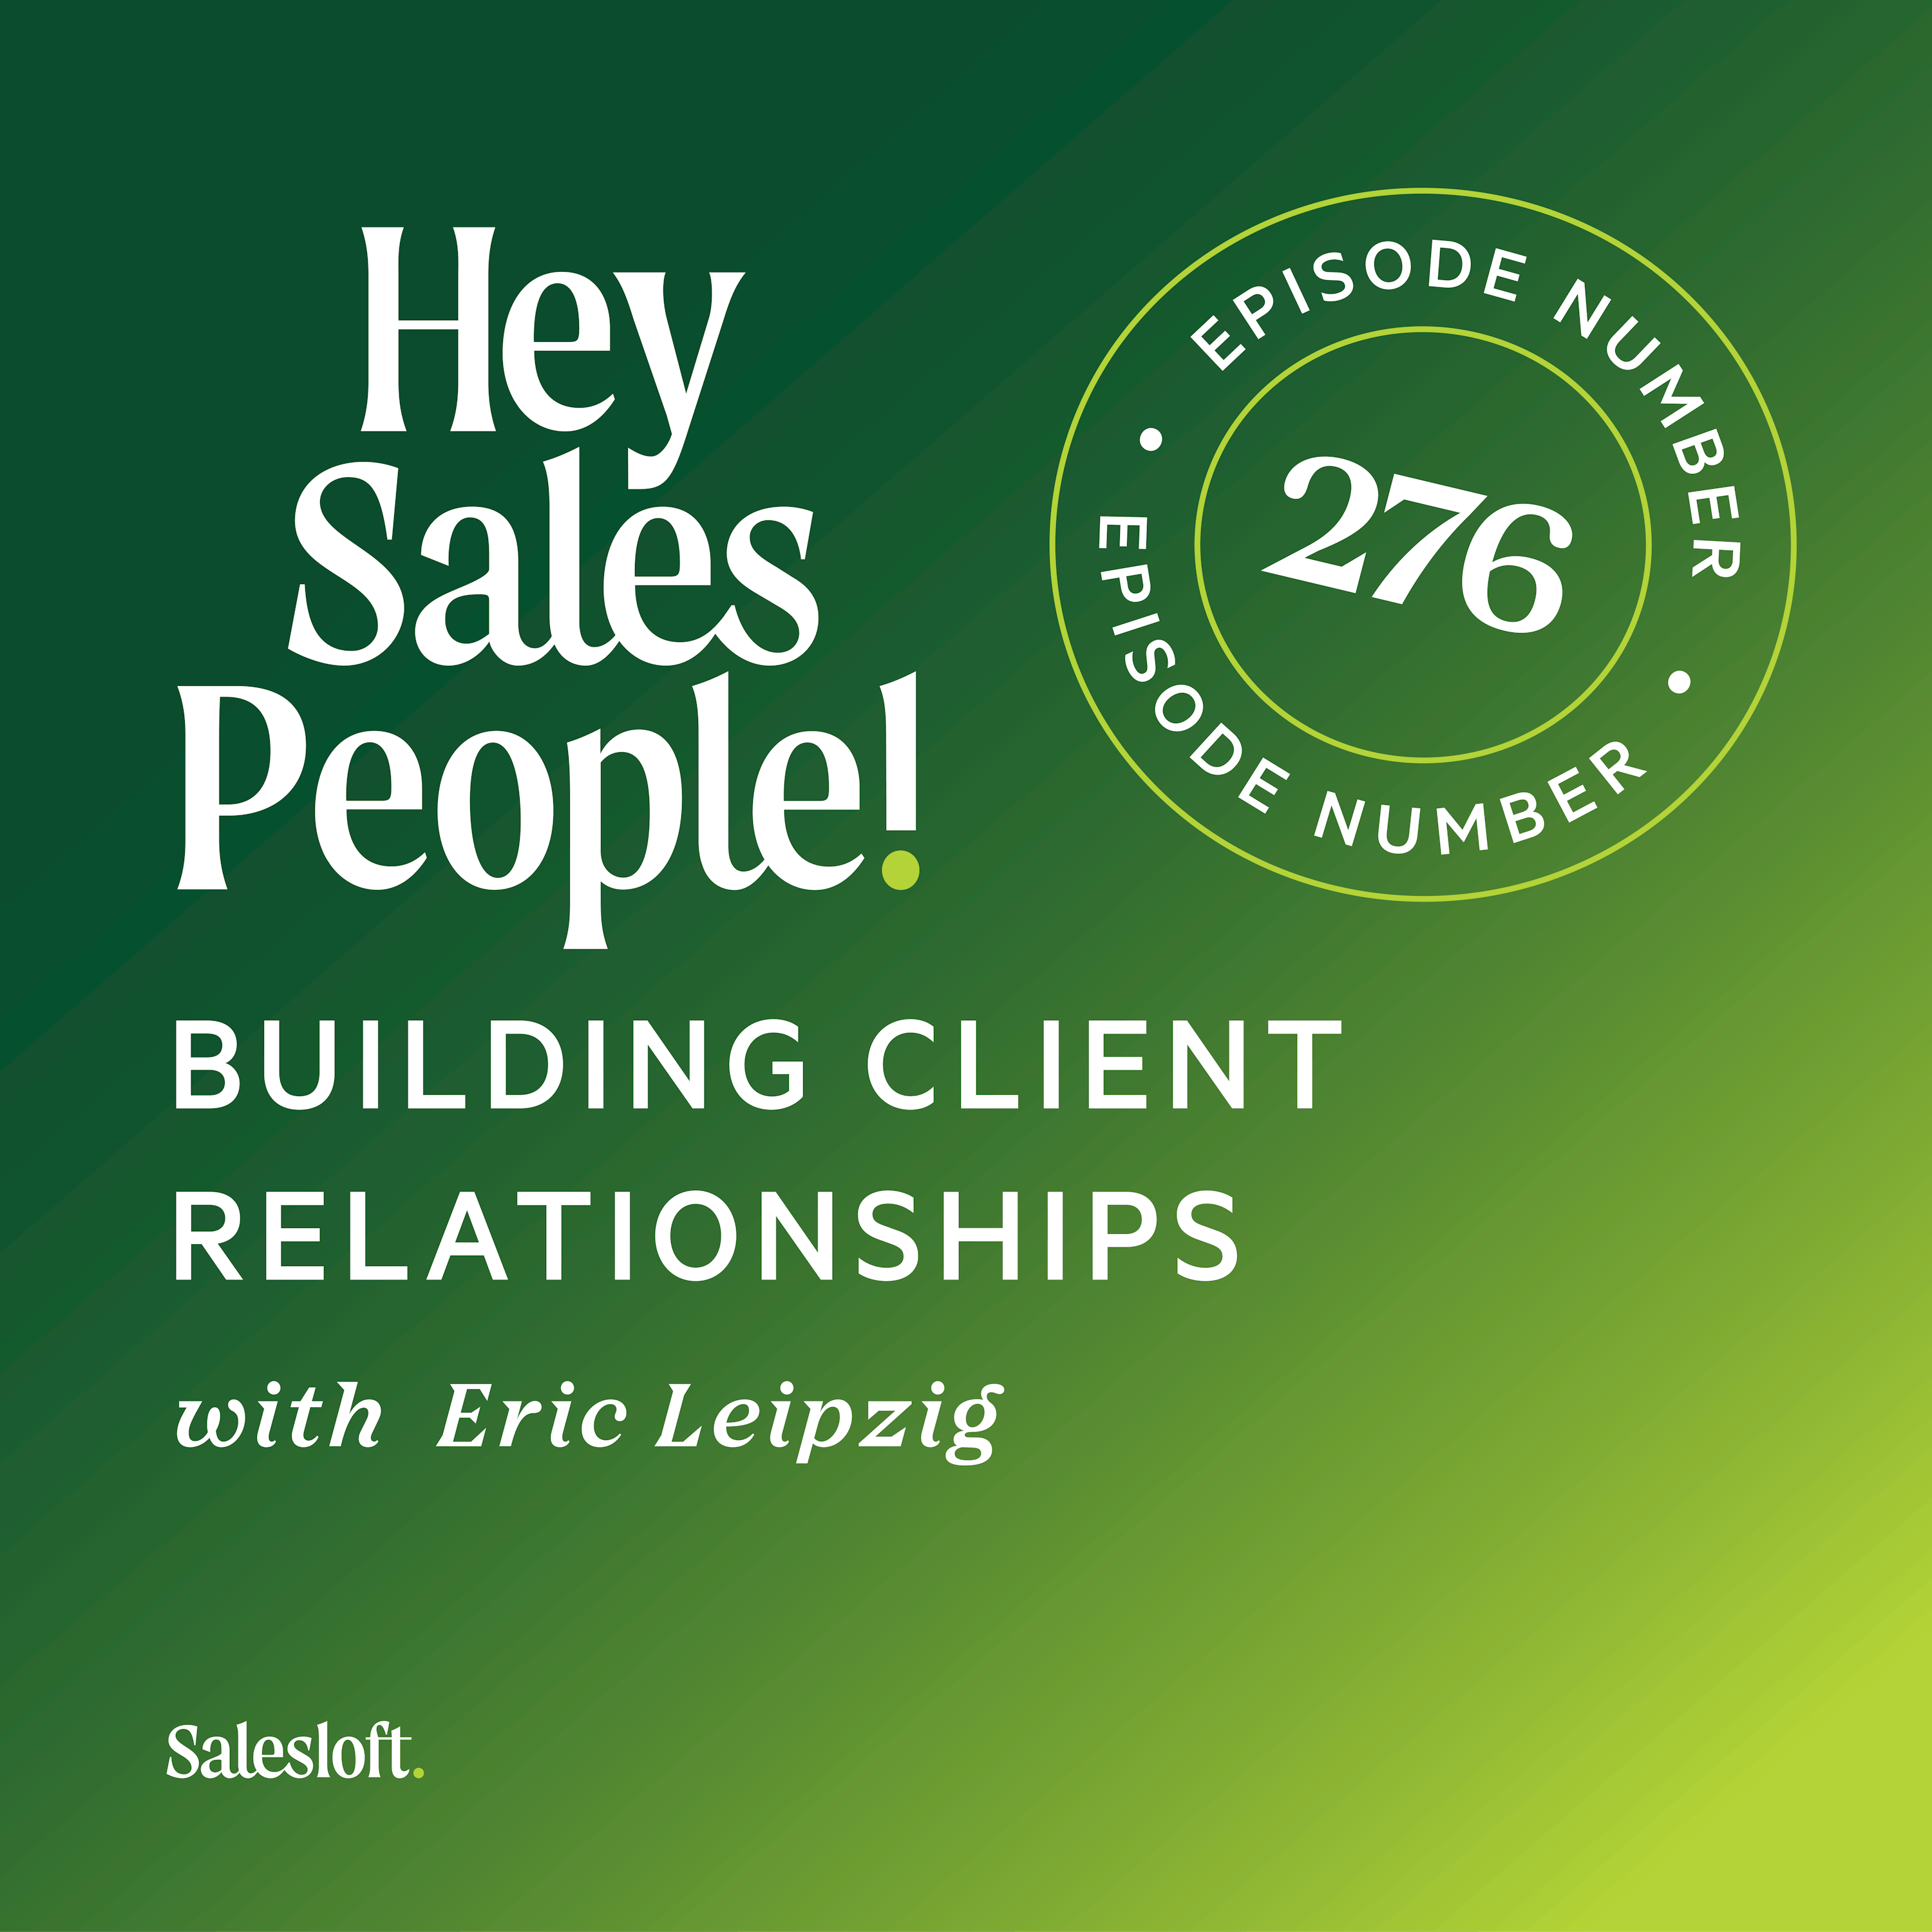 Building Client Relationships With Eric Leipzig